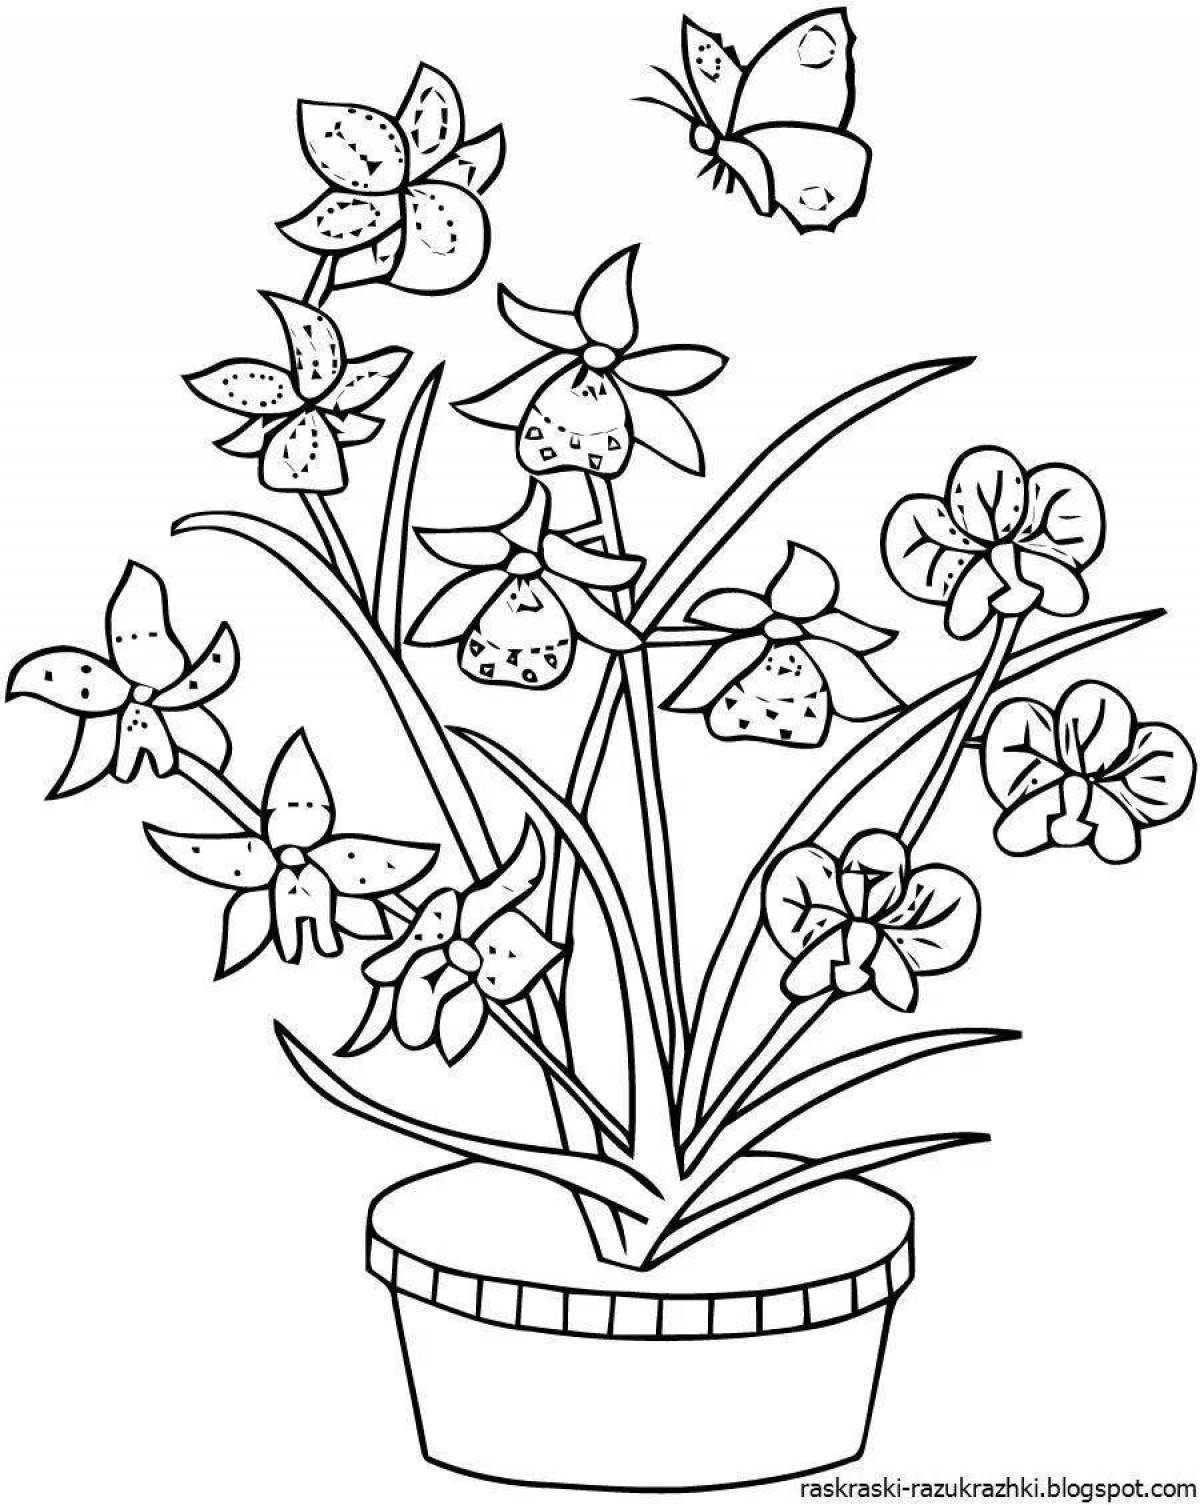 Coloring page charming indoor flower